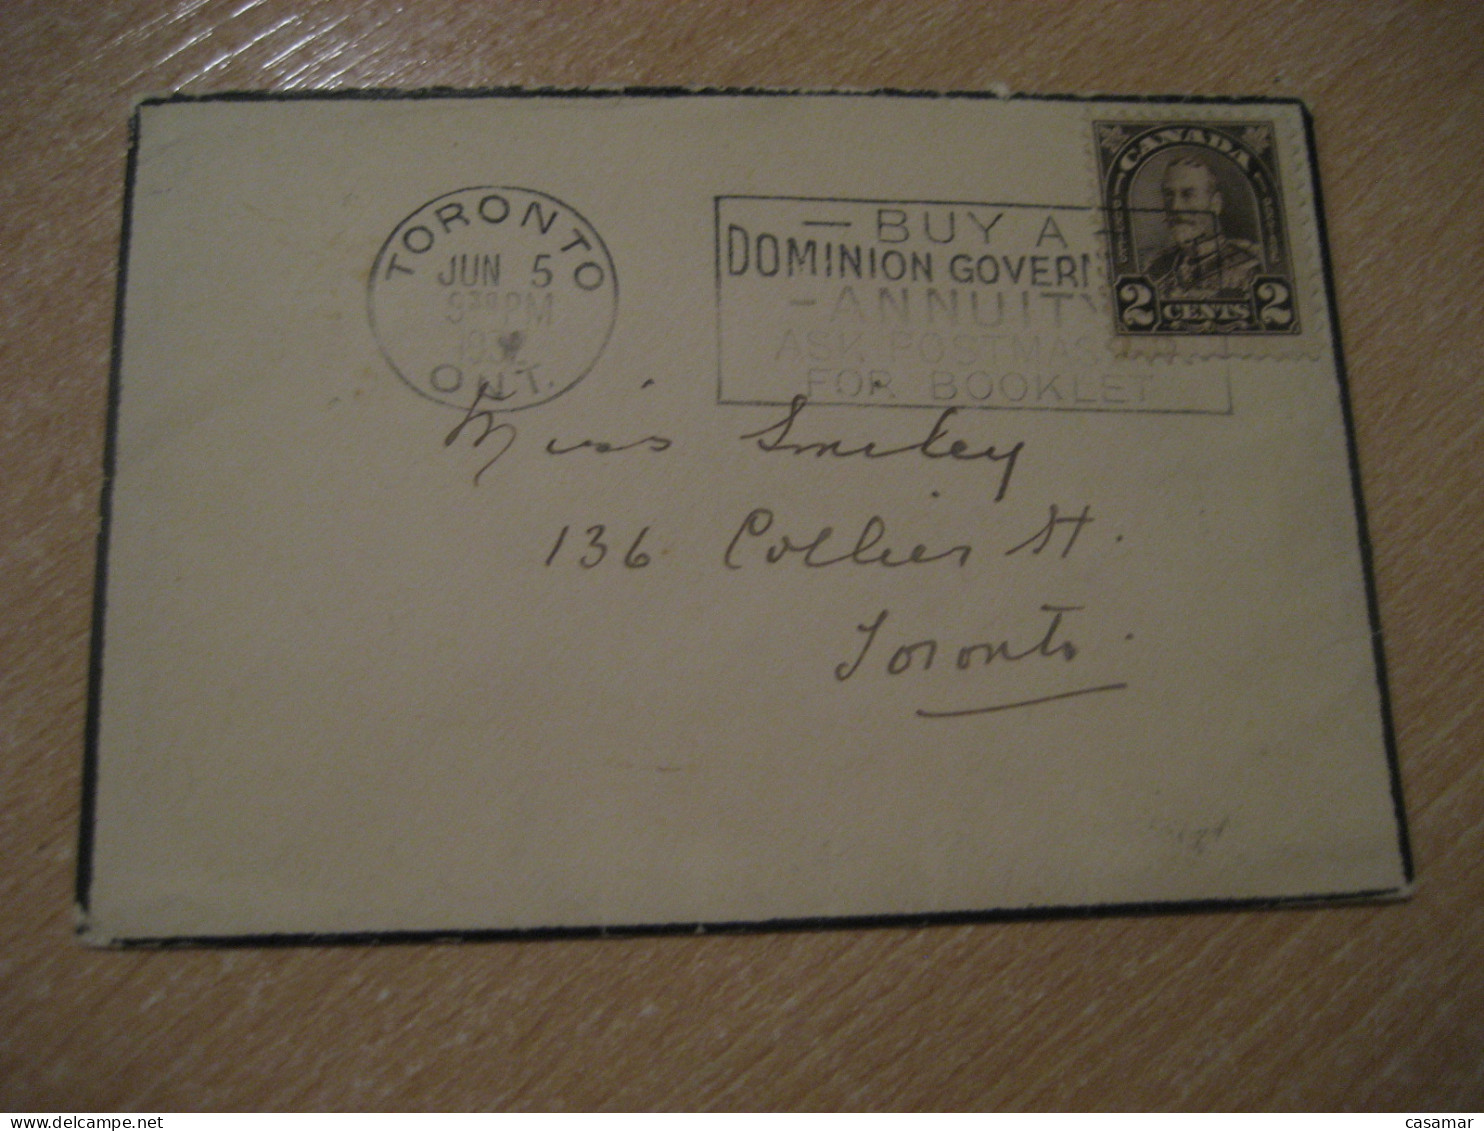 TORONTO 1932 Condolence Duel Booklet Cancel Cover CANADA - Covers & Documents